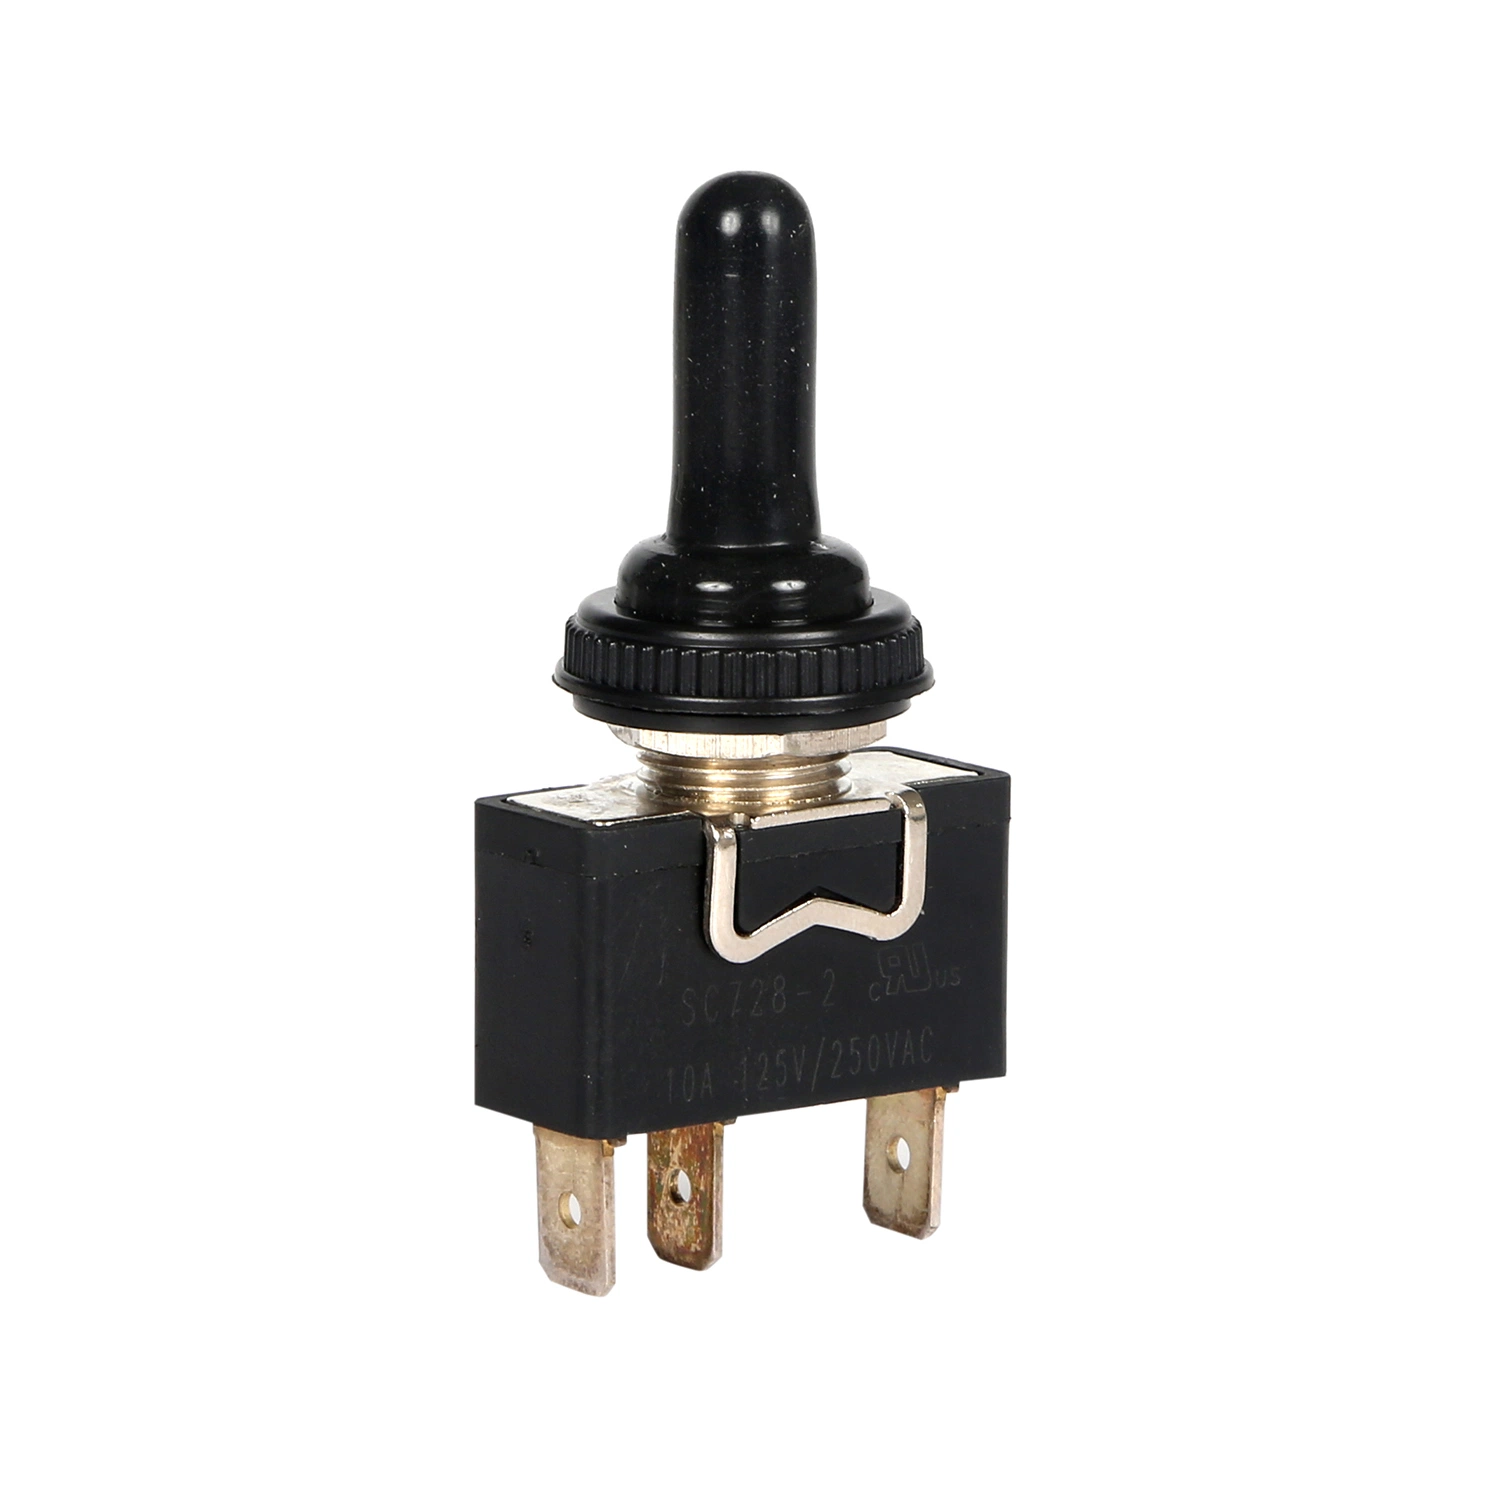 Baokezhen Sc728 10A 250VAC on-off/on-off-on Reset Toggle Switch